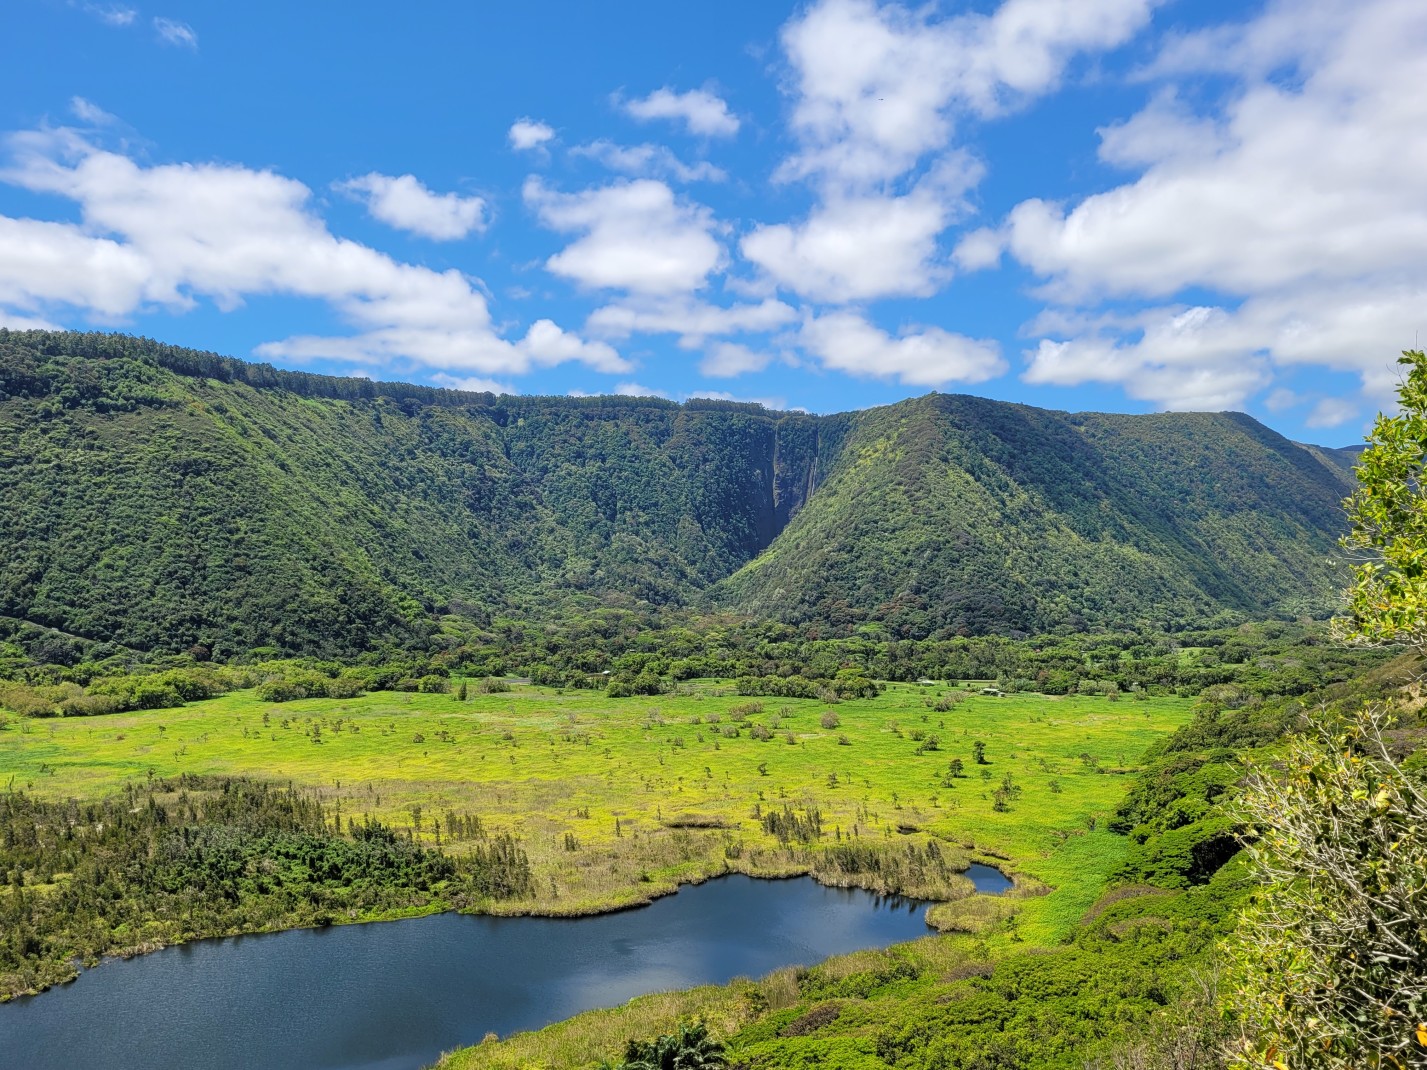 Green mountains and body of water with blue skies during daytime